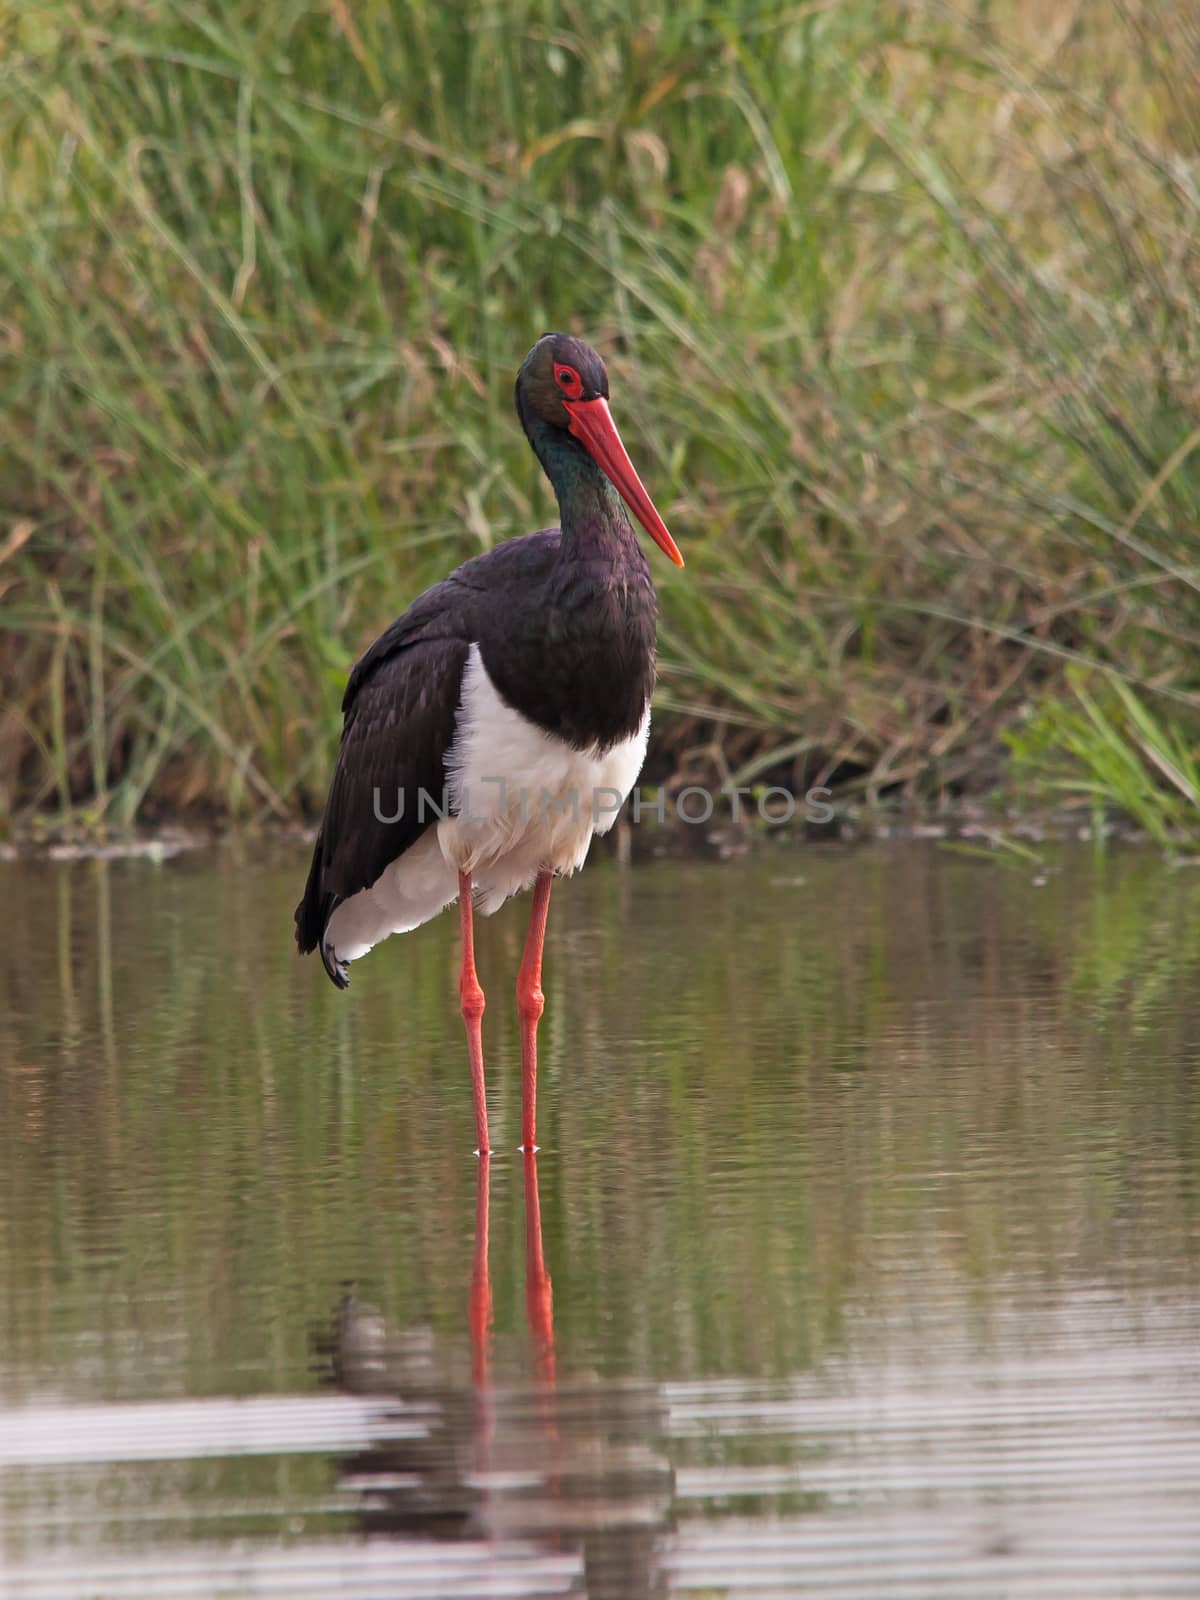 At five feet tall this elegant wader is the largest of all storks.